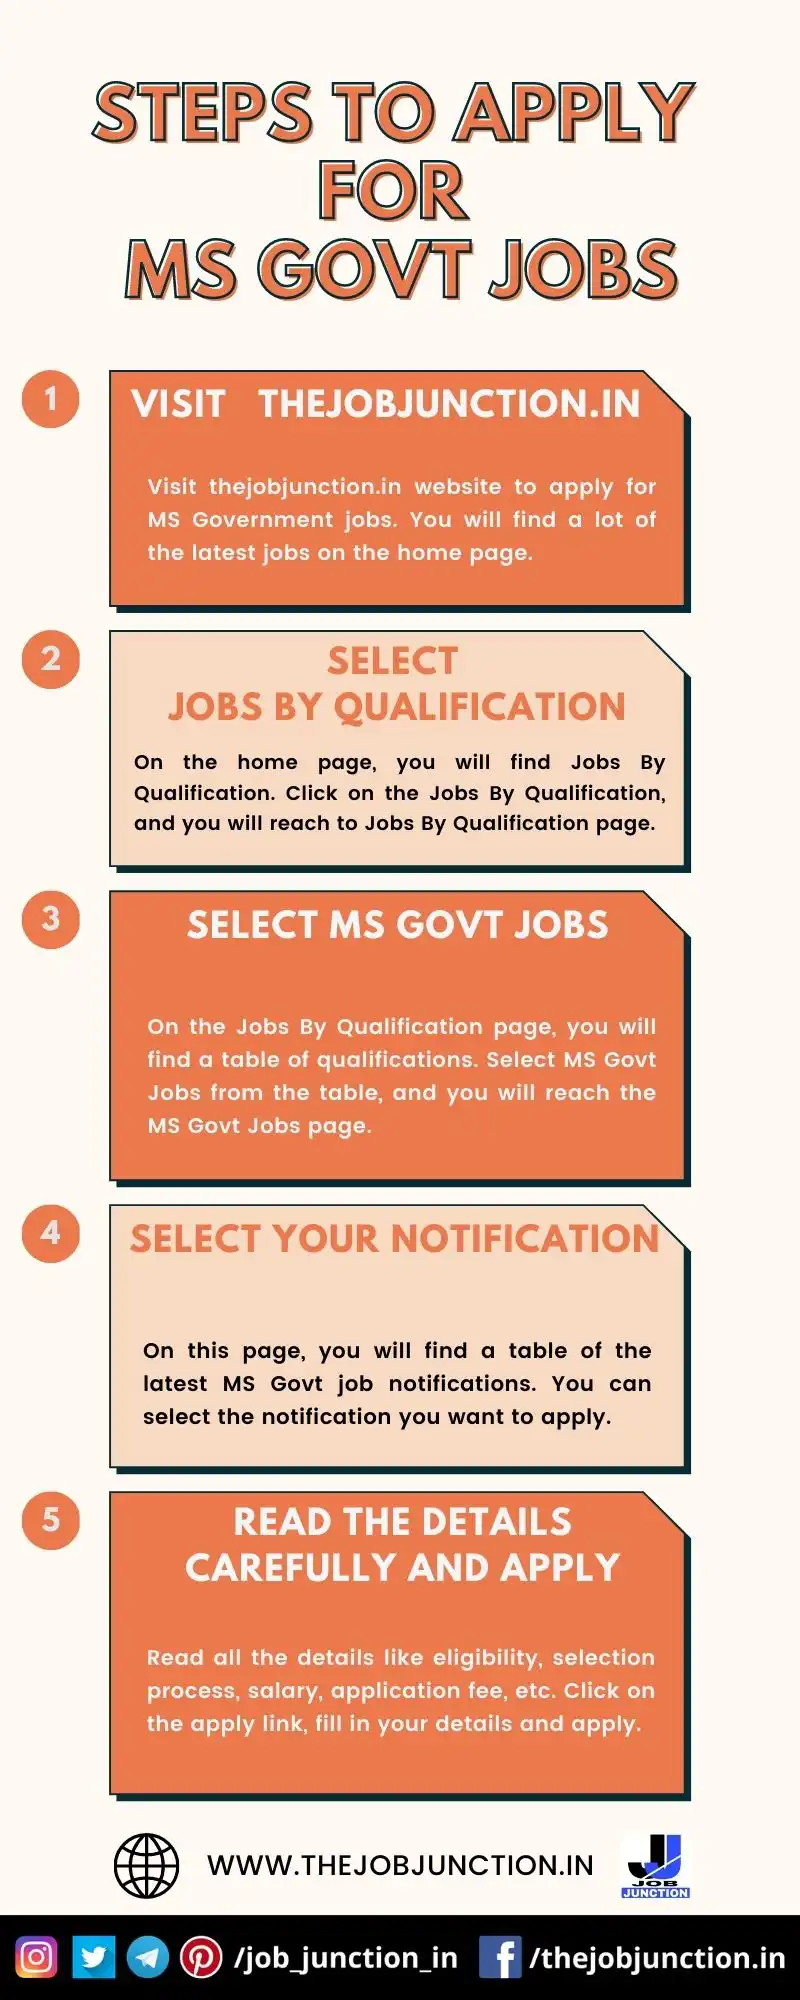 STEPS TO APPLY FOR MS GOVT JOBS